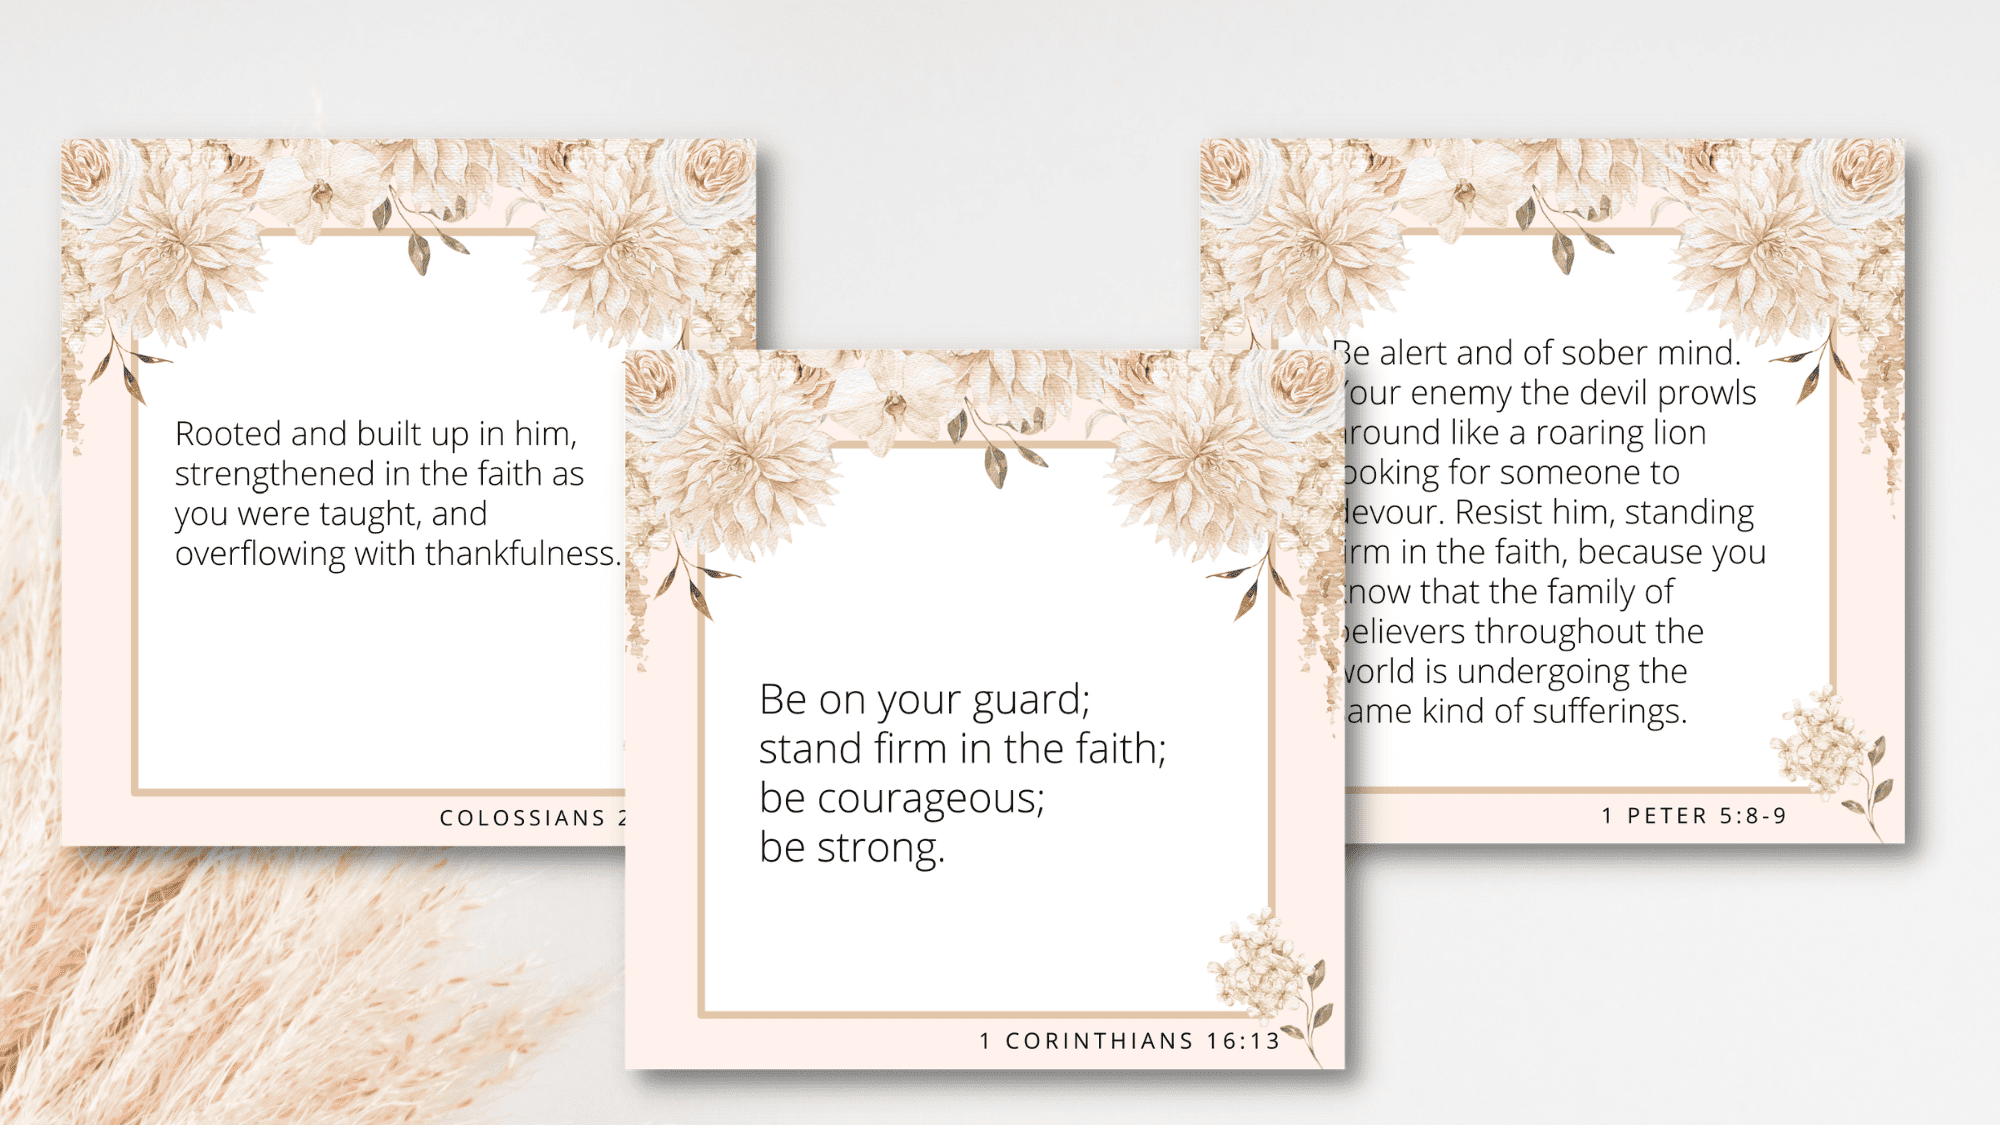 Scripture prayer cards for endurance using the Bible verses on perseverance and endurance